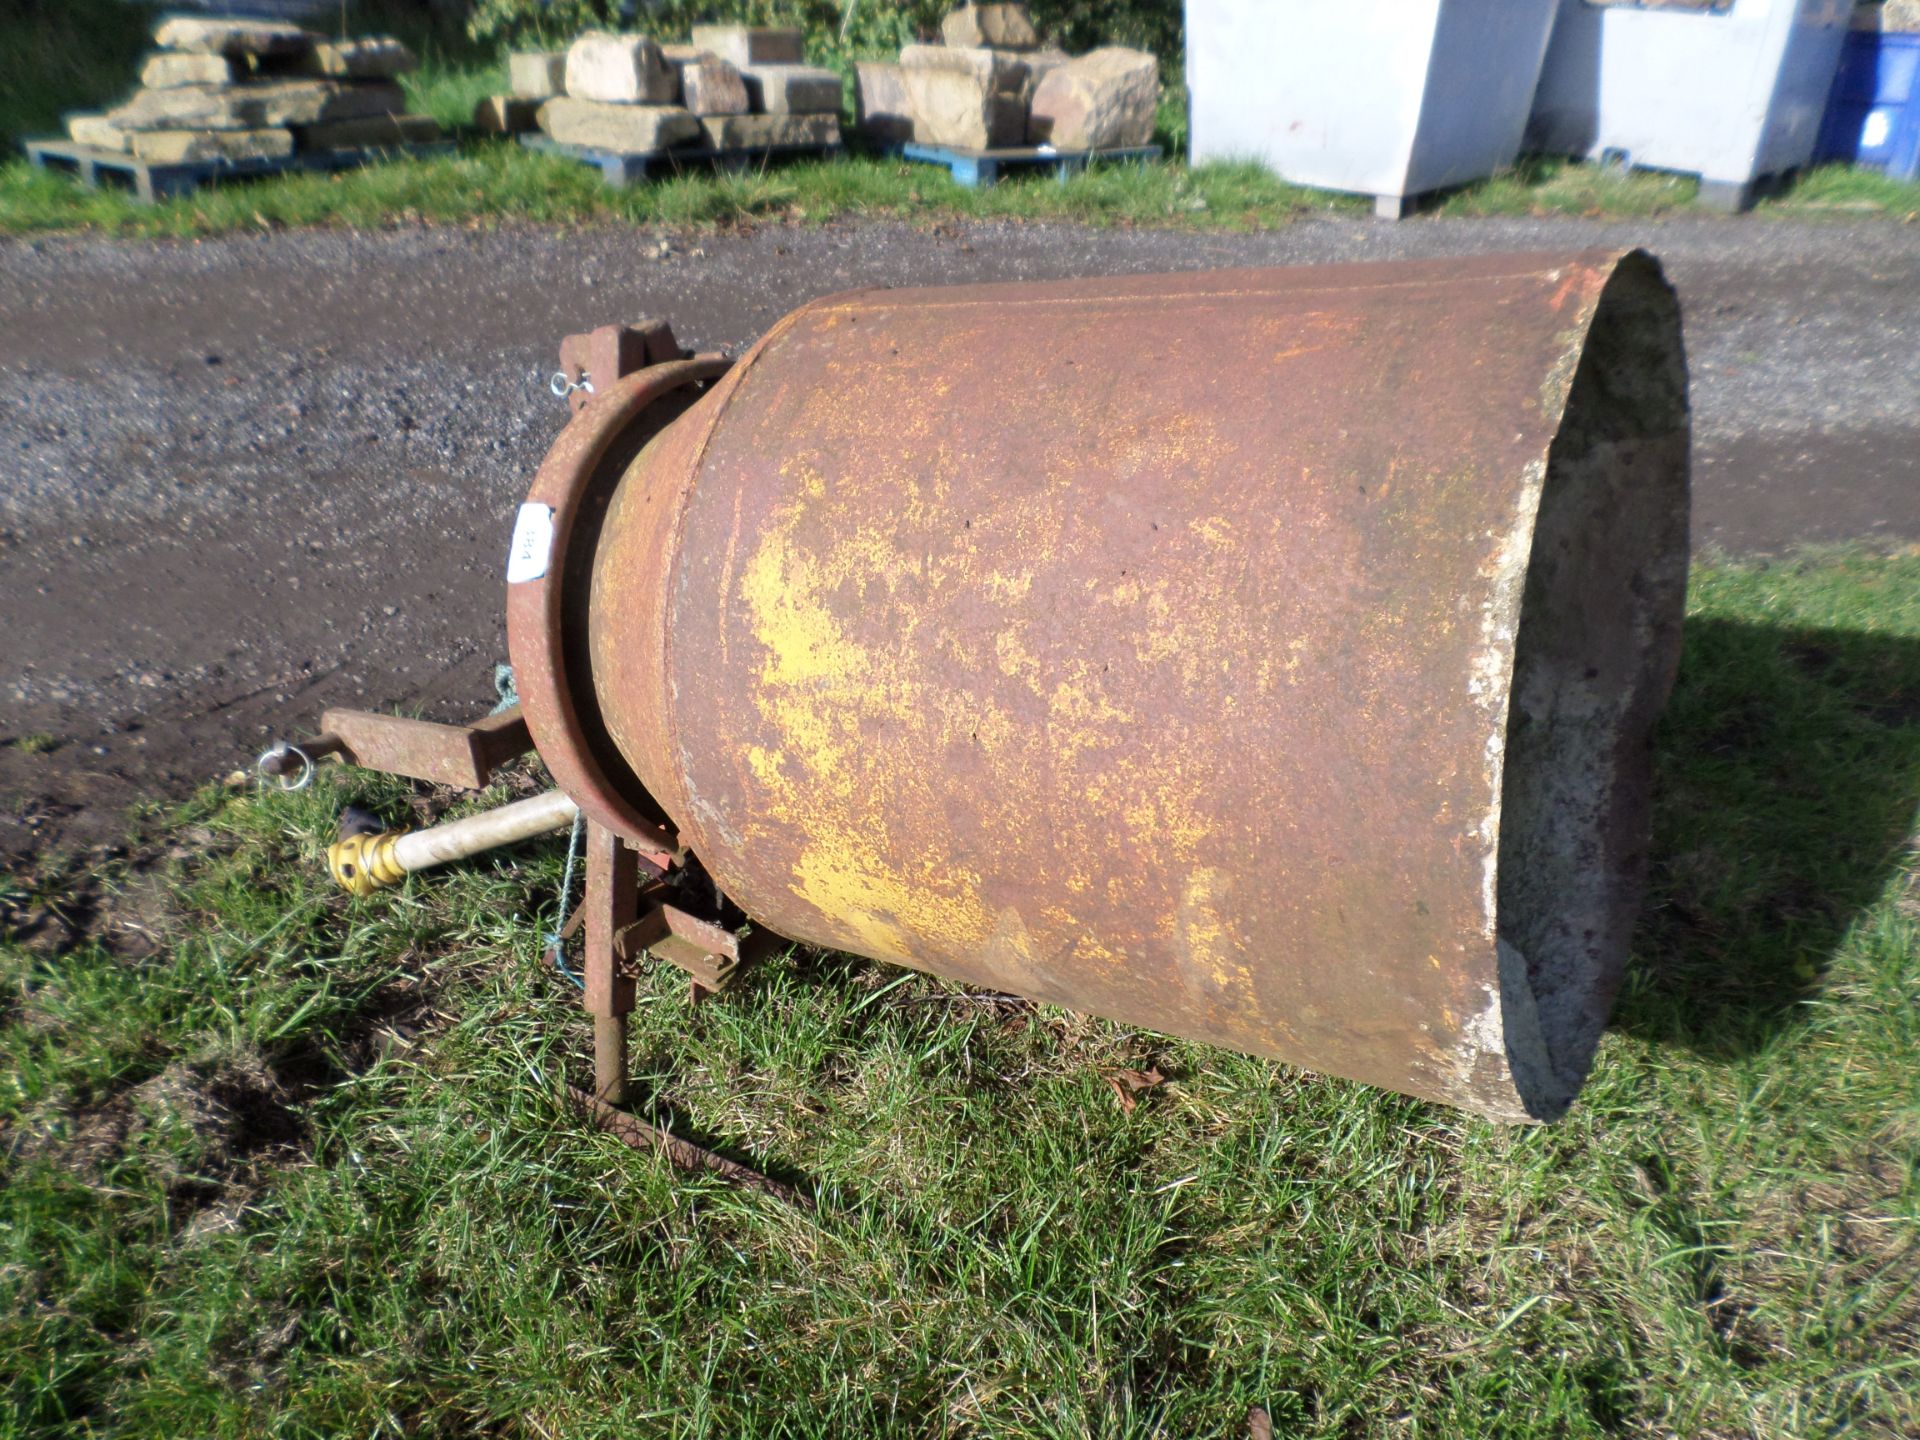 PTO cement mixer, working order, with PTO shaft but guard missing - Image 2 of 3